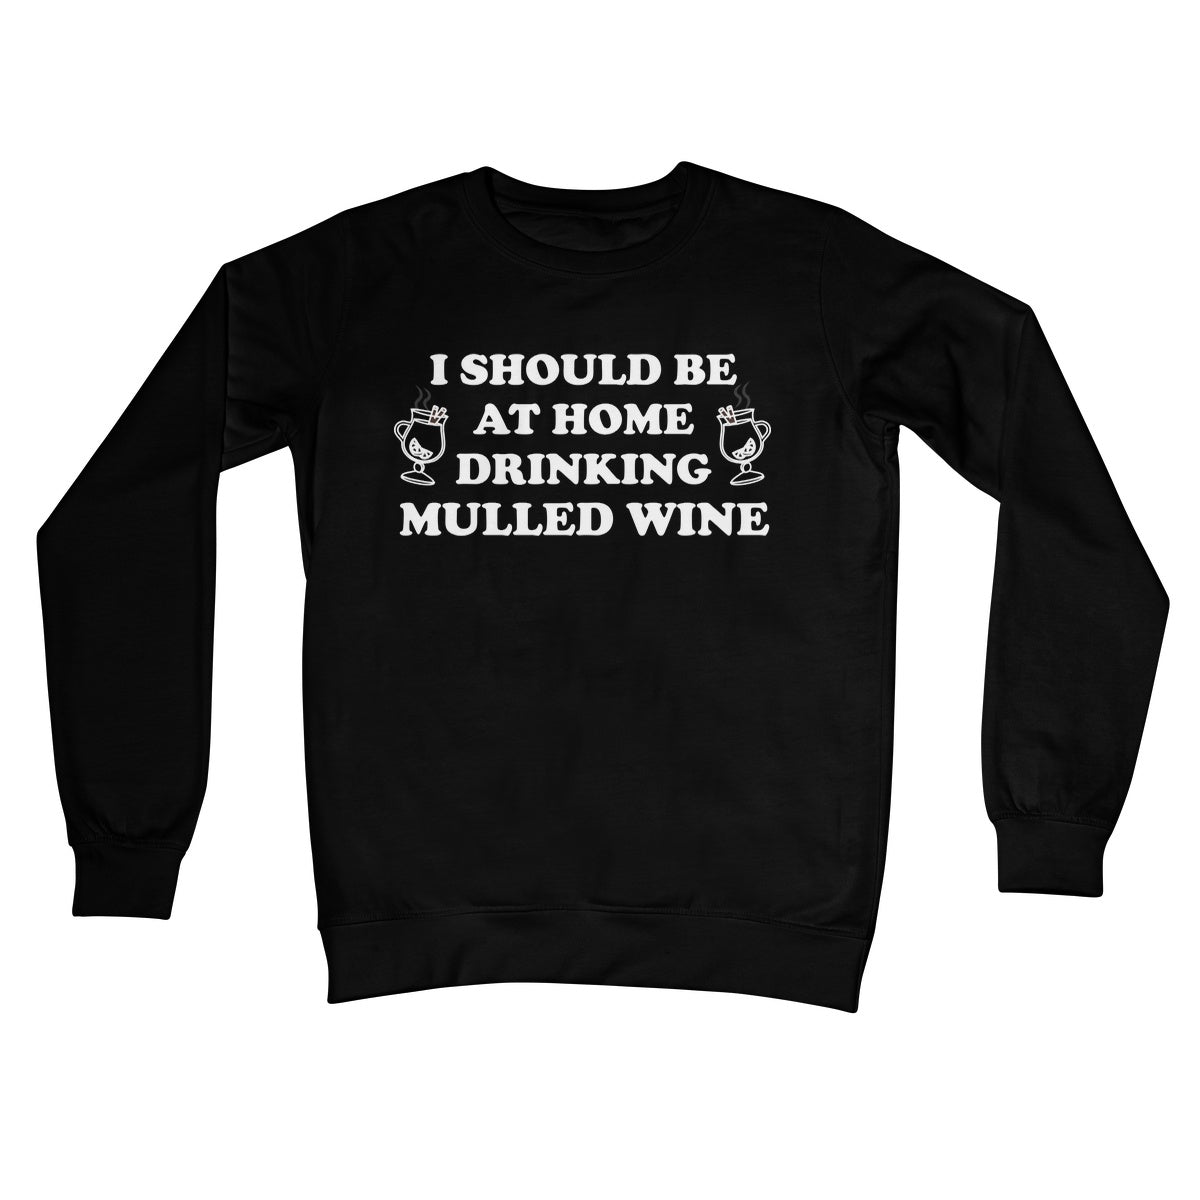 I Should be at Home Drinking Mulled Wine Funny Christmas Jumper Gift Work Office Wine Crew Neck Sweatshirt